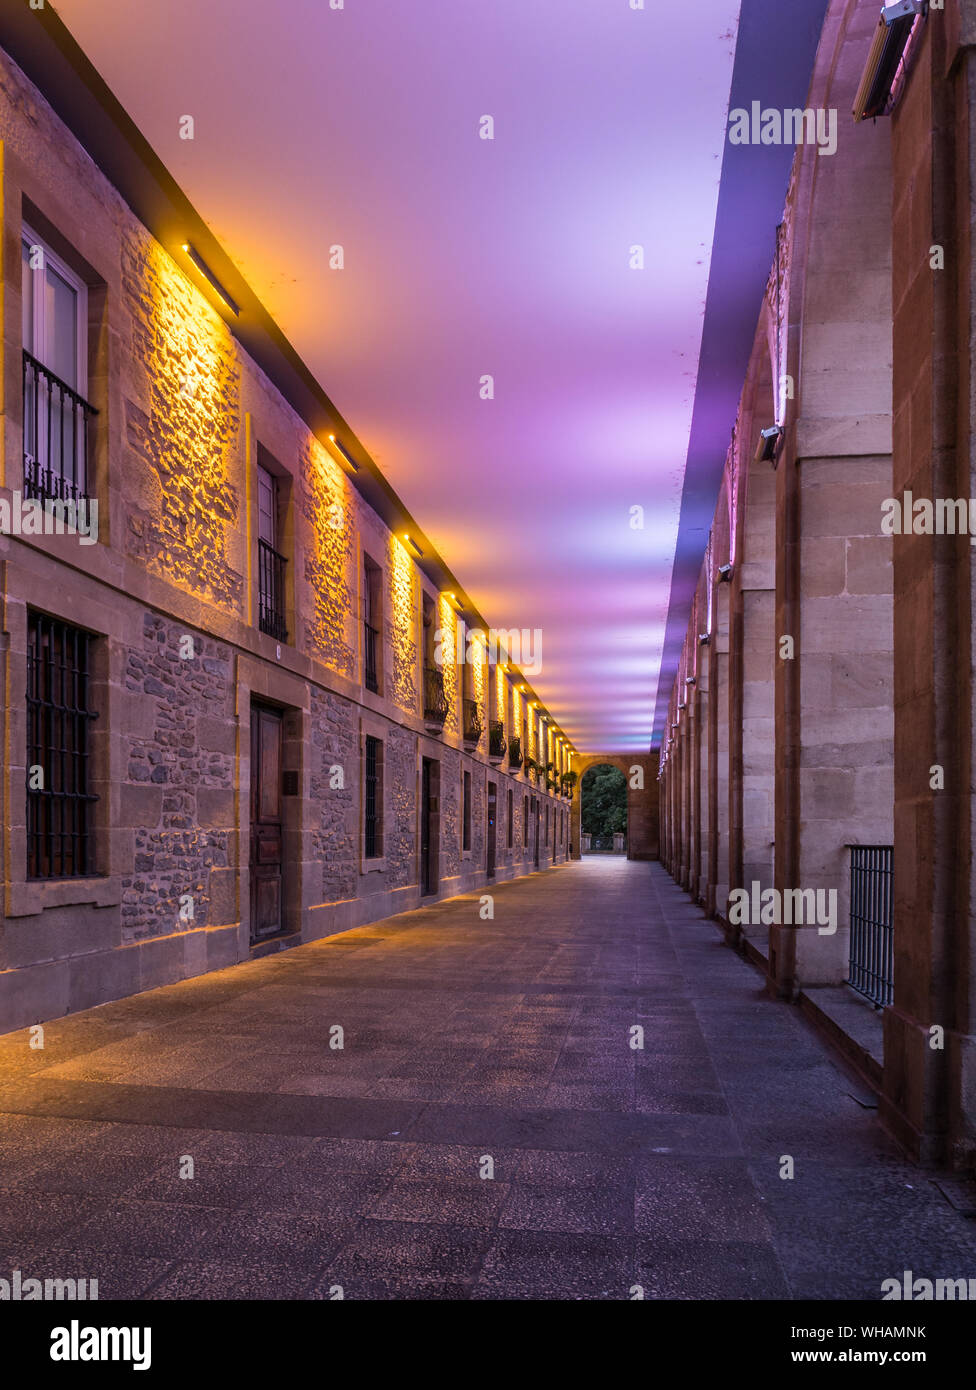 Colorful illumination of the Los Arquillos passageway in Vitoria-Gasteiz, Basque Country, Spain Stock Photo